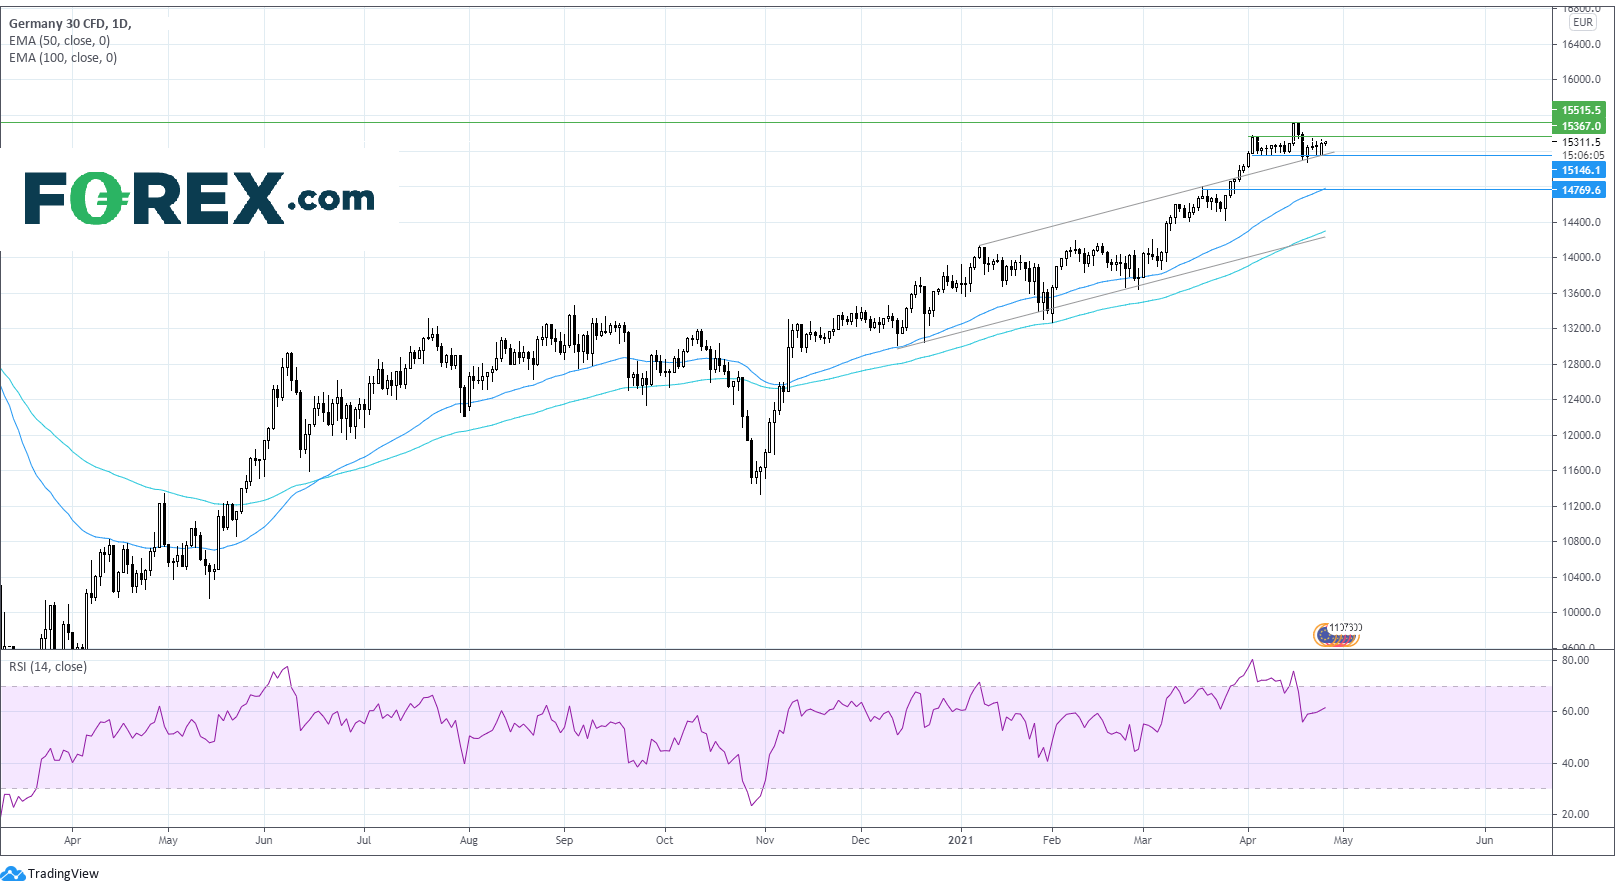 Chart analysis of Dax. Published in April 2021 by FOREX.com